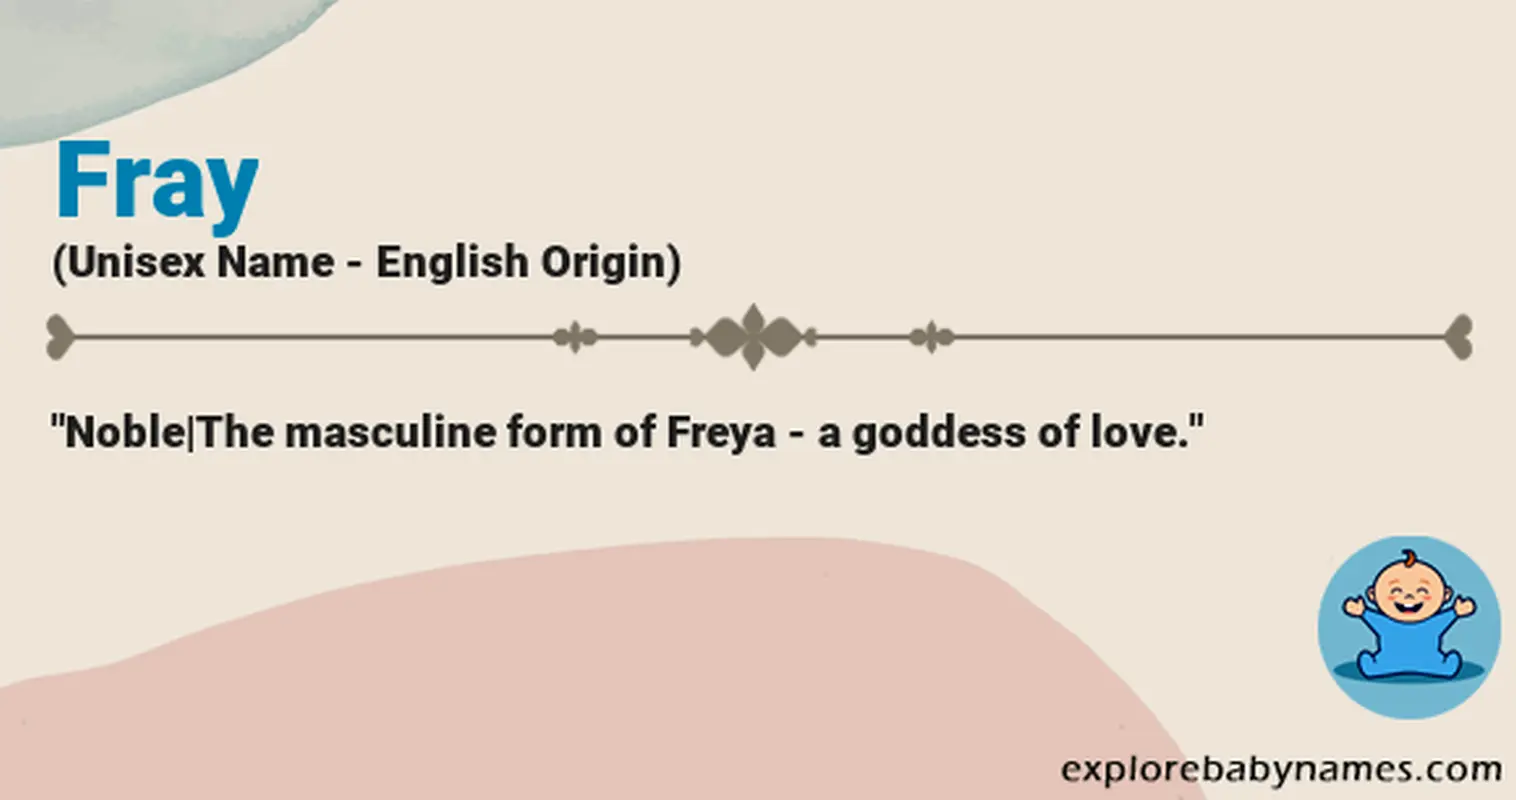 Meaning of Fray